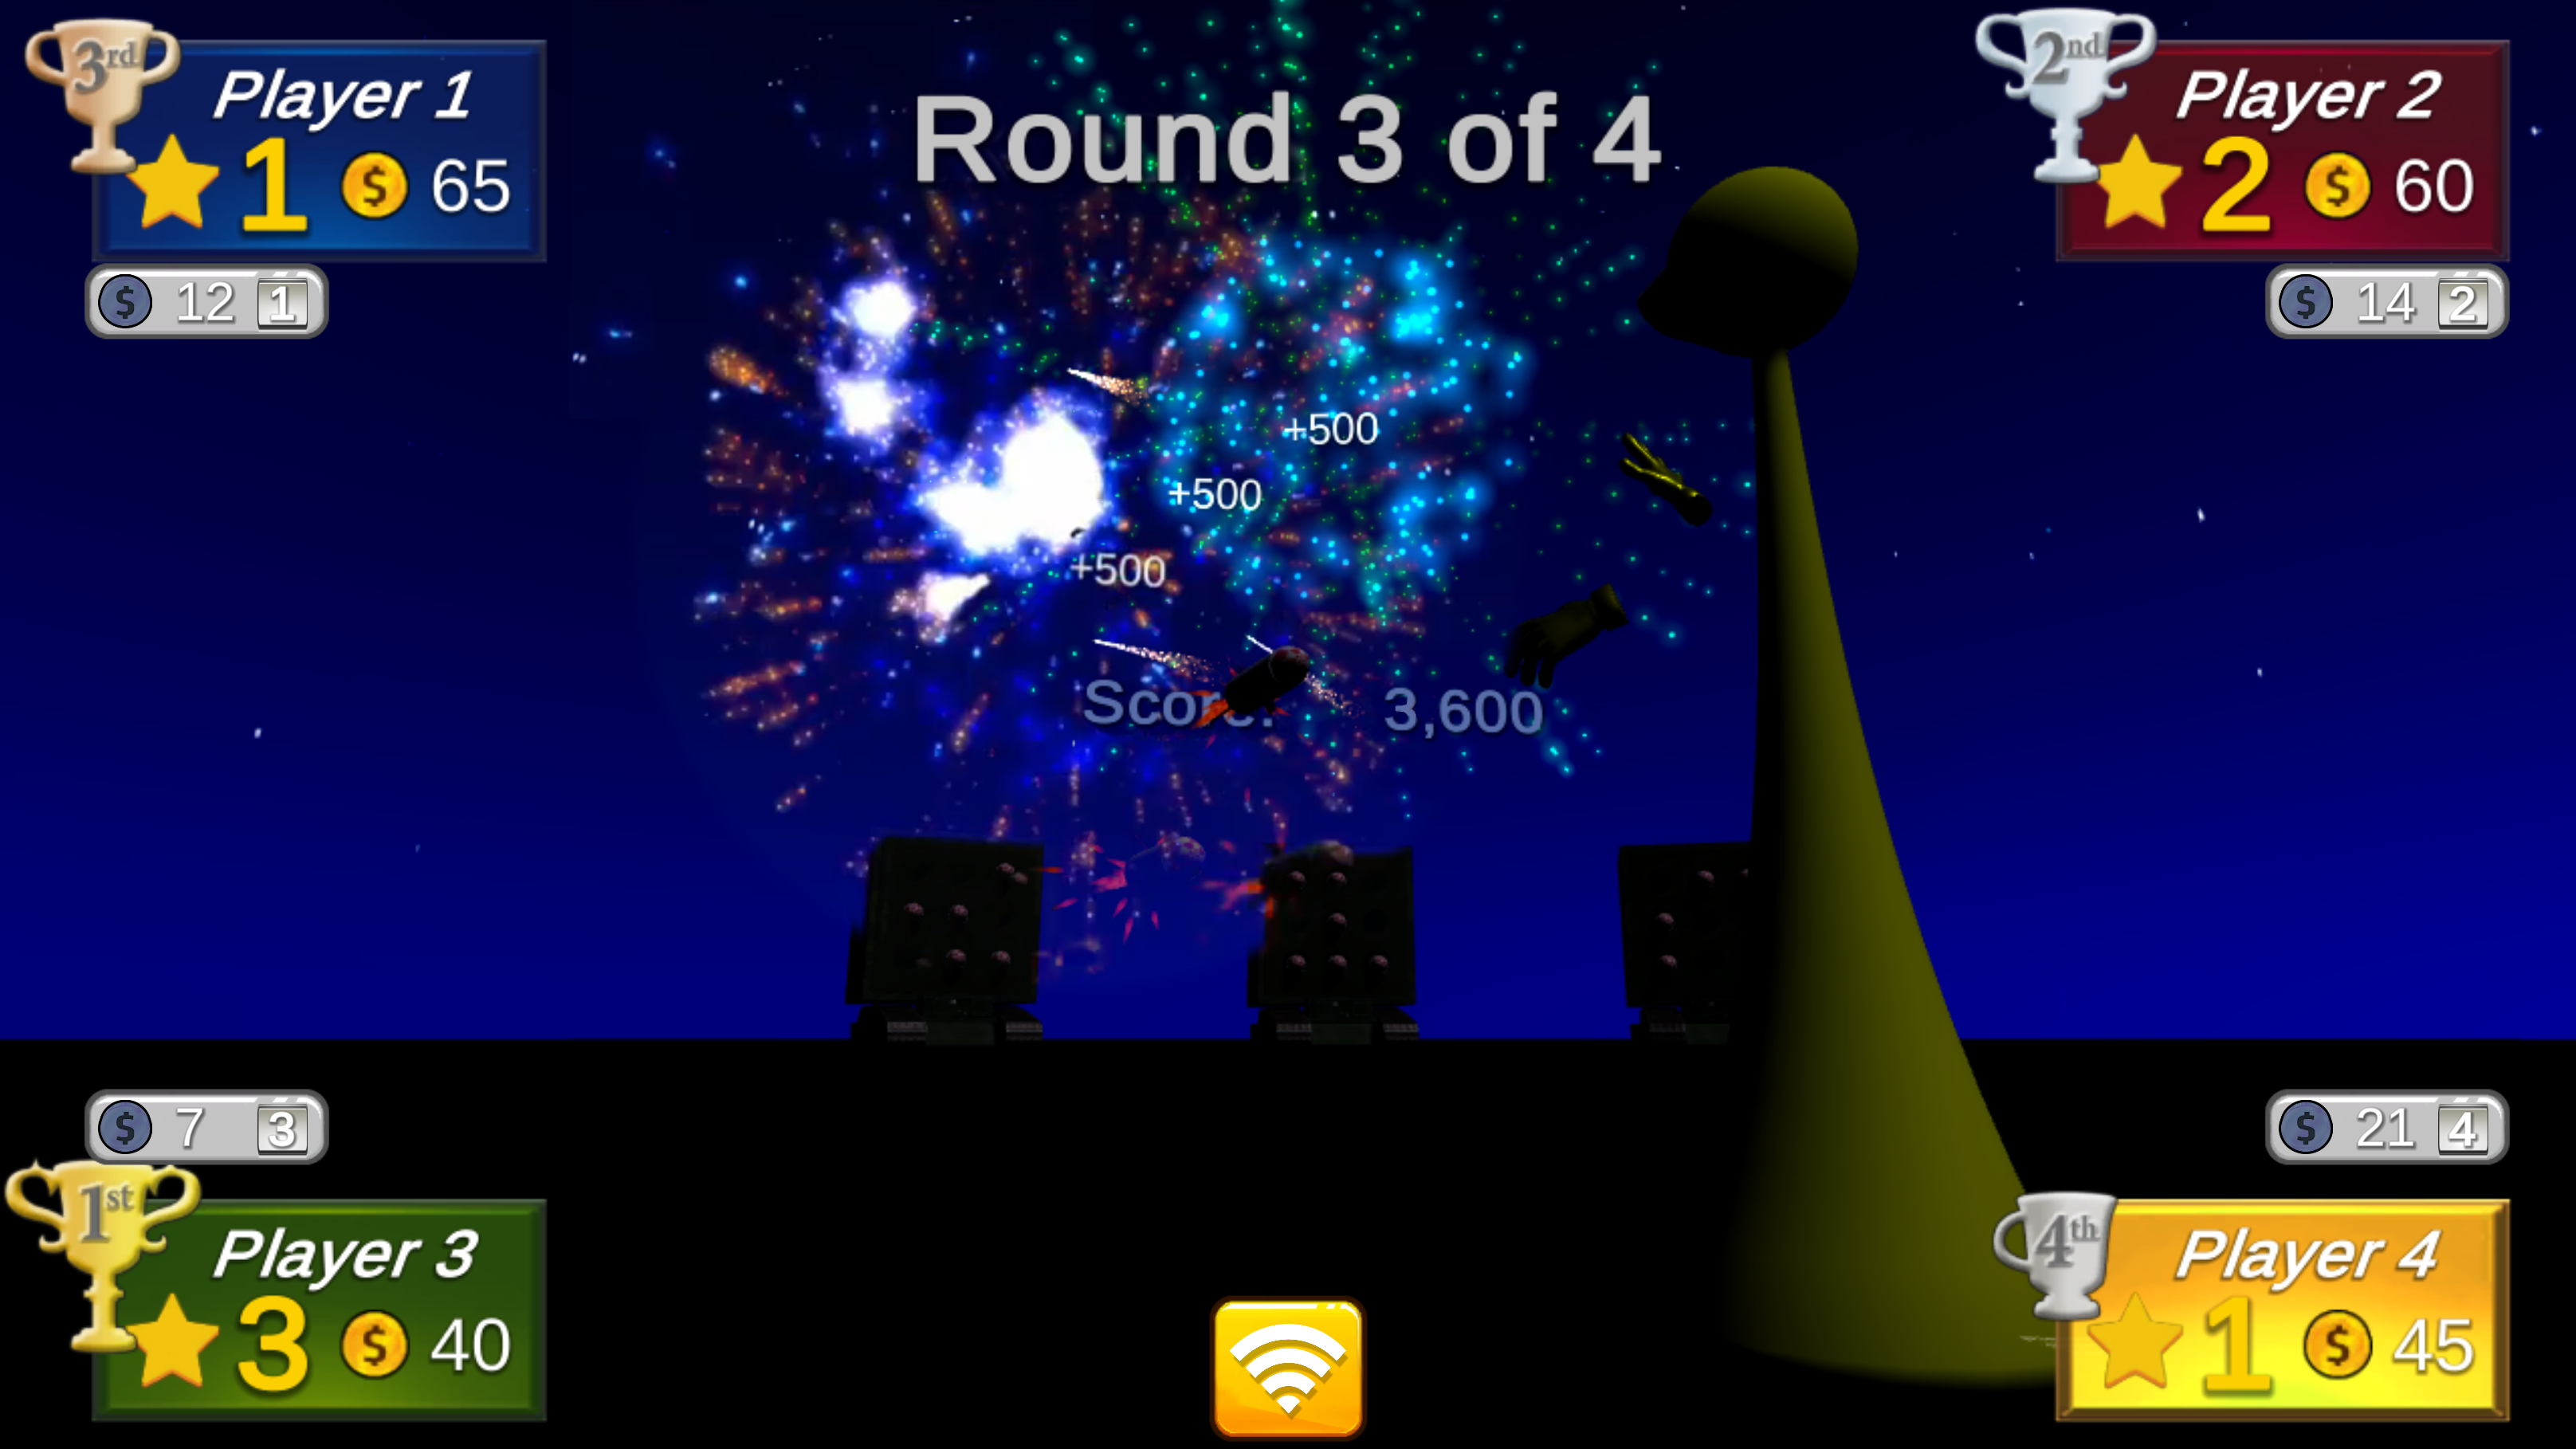 In VRPC minigame Missiles 2 Fireworks, create a brilliant display in the night sky